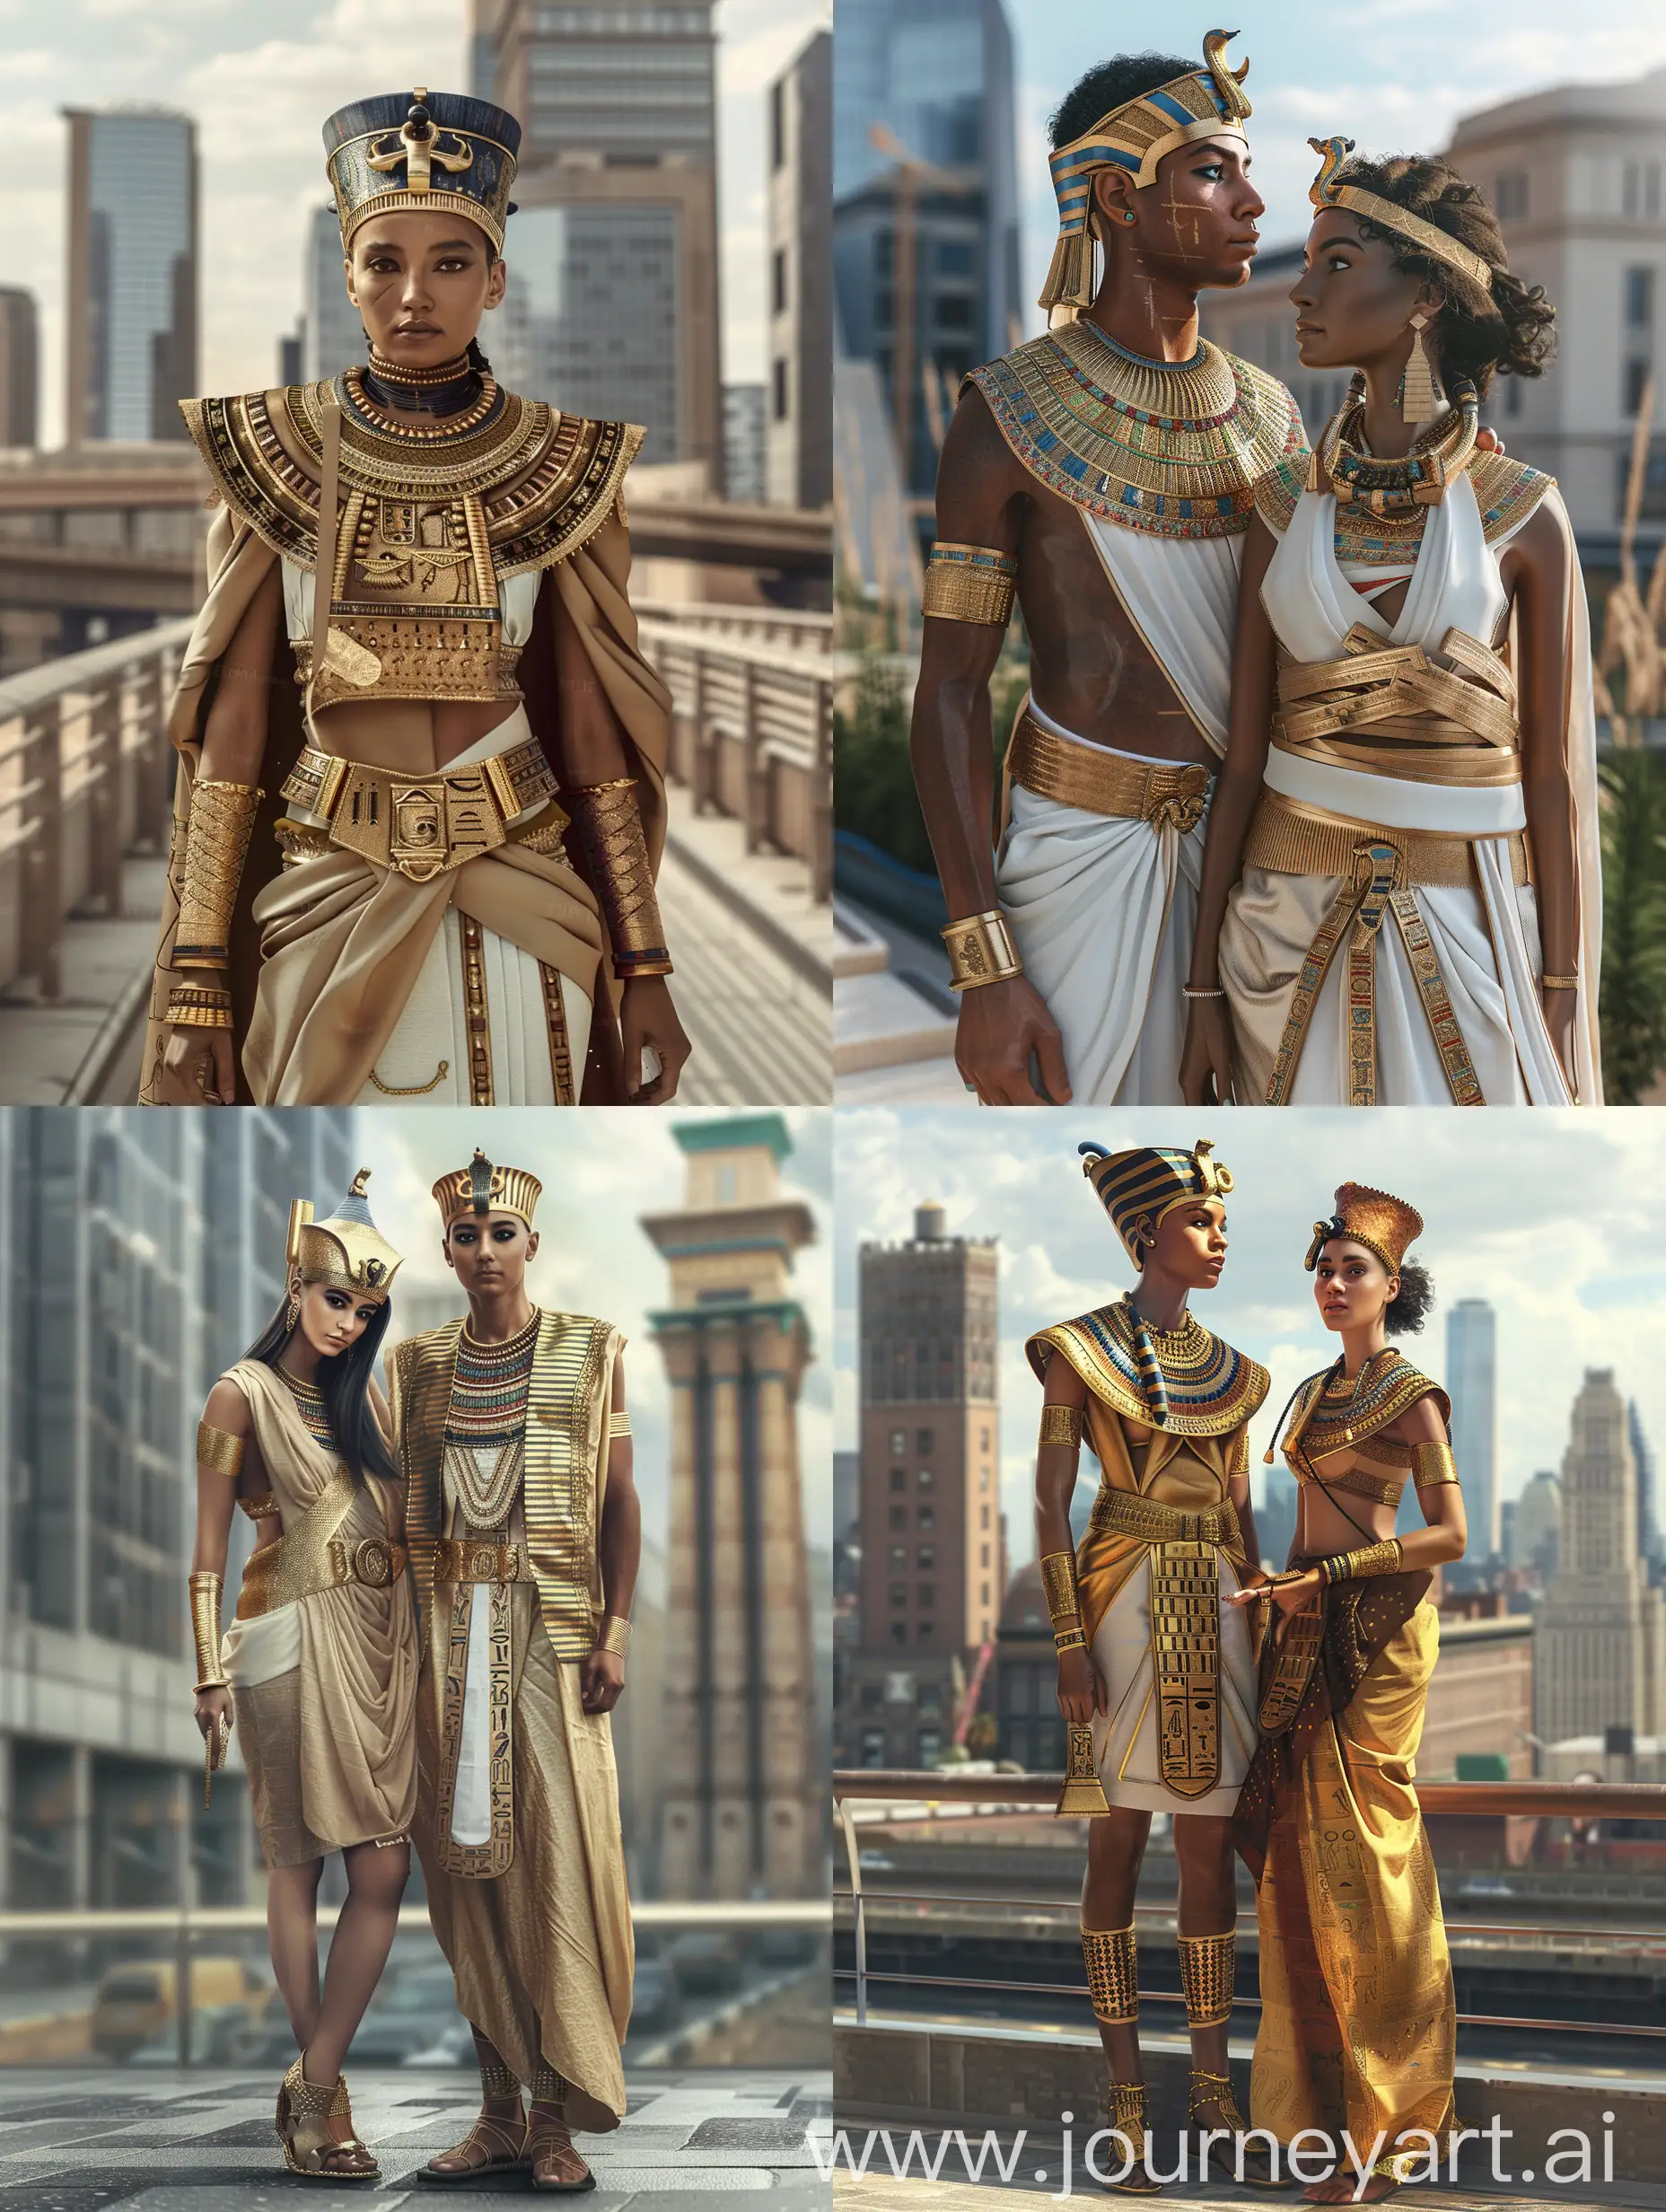 Contemporary-Pharaonic-Fashion-Urban-Royalty-in-Ancient-Garb